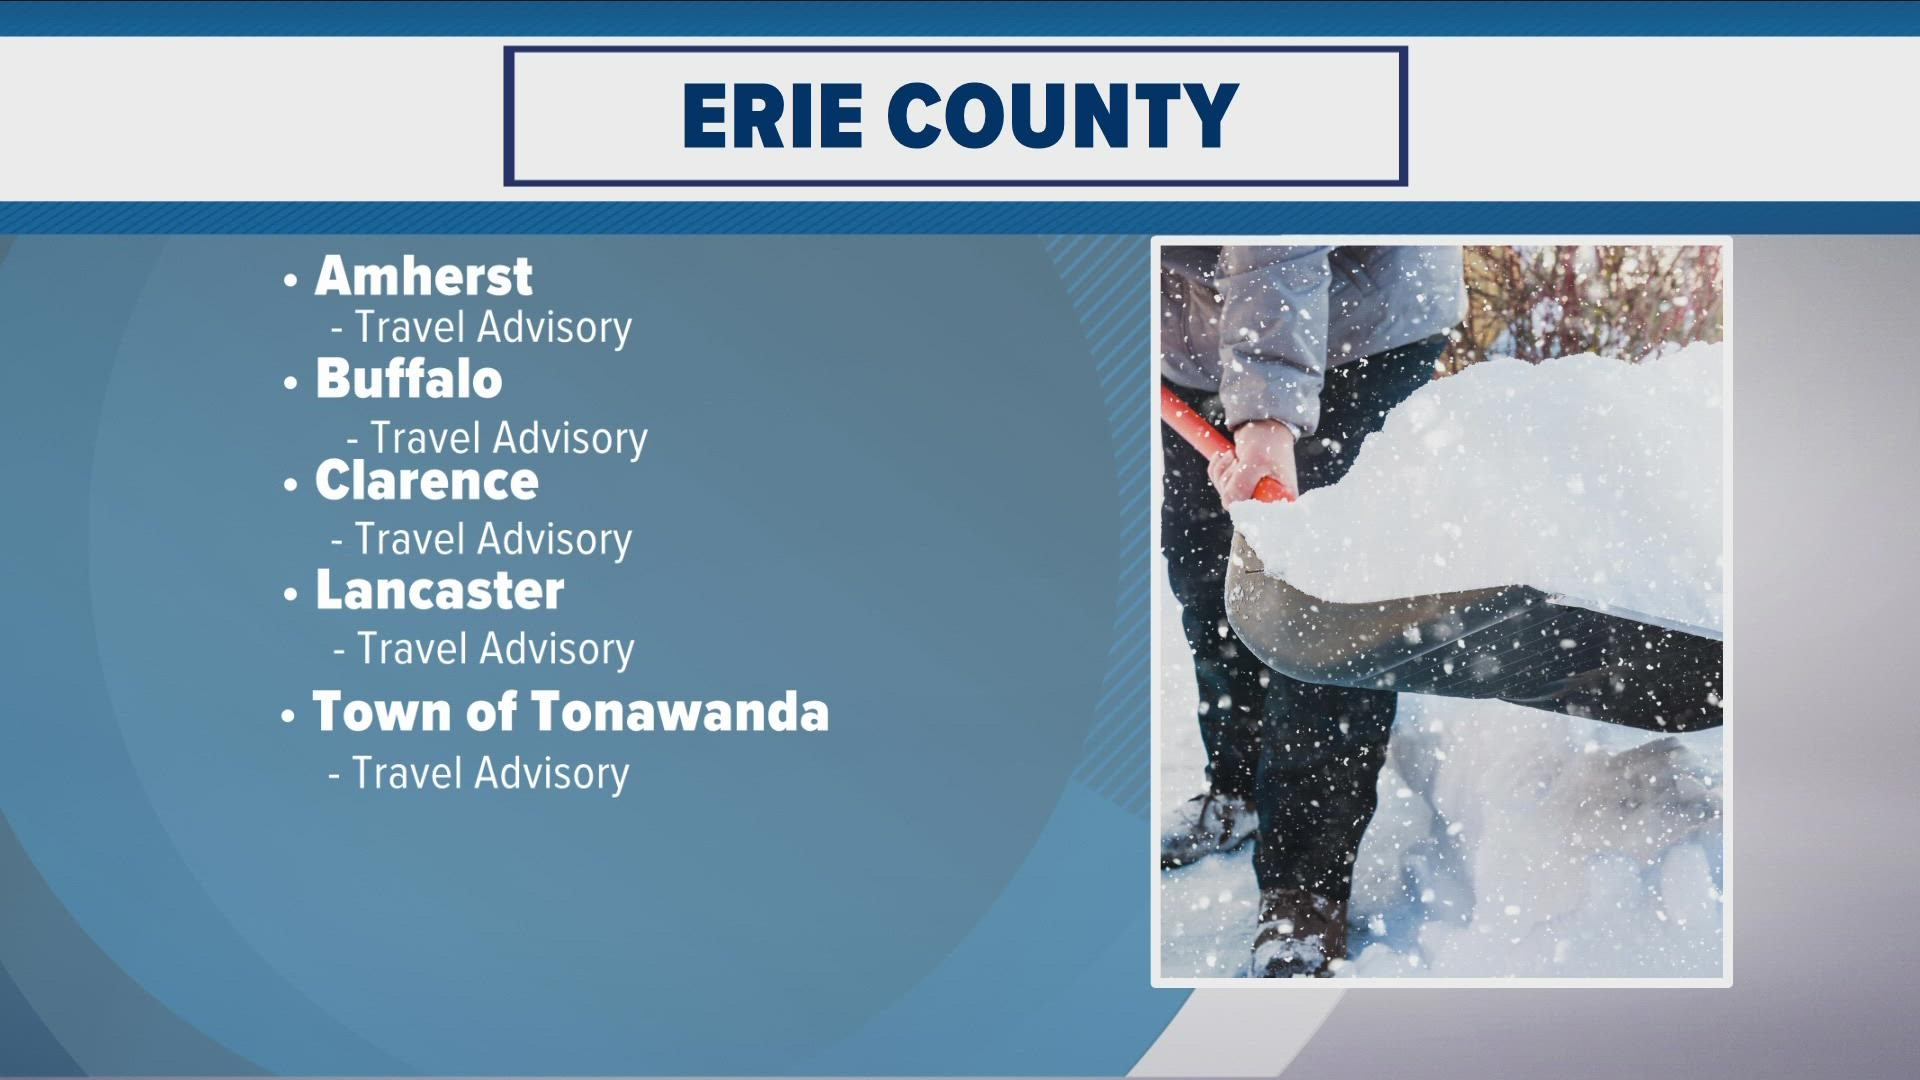 There are still several travel advisories and bans throughout the region tonight.